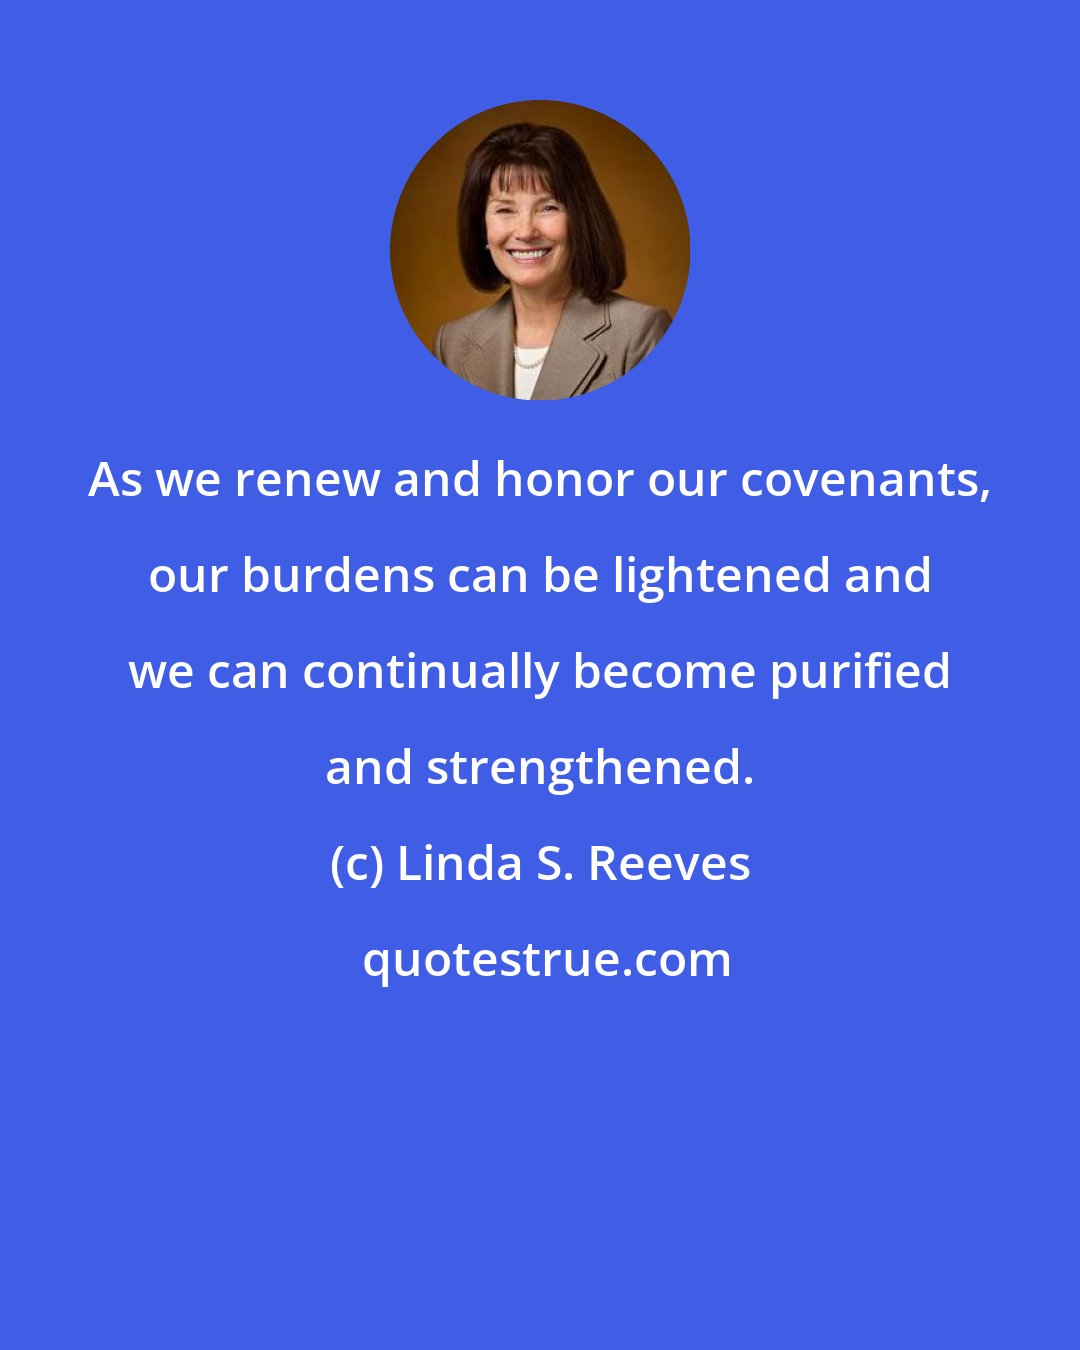 Linda S. Reeves: As we renew and honor our covenants, our burdens can be lightened and we can continually become purified and strengthened.